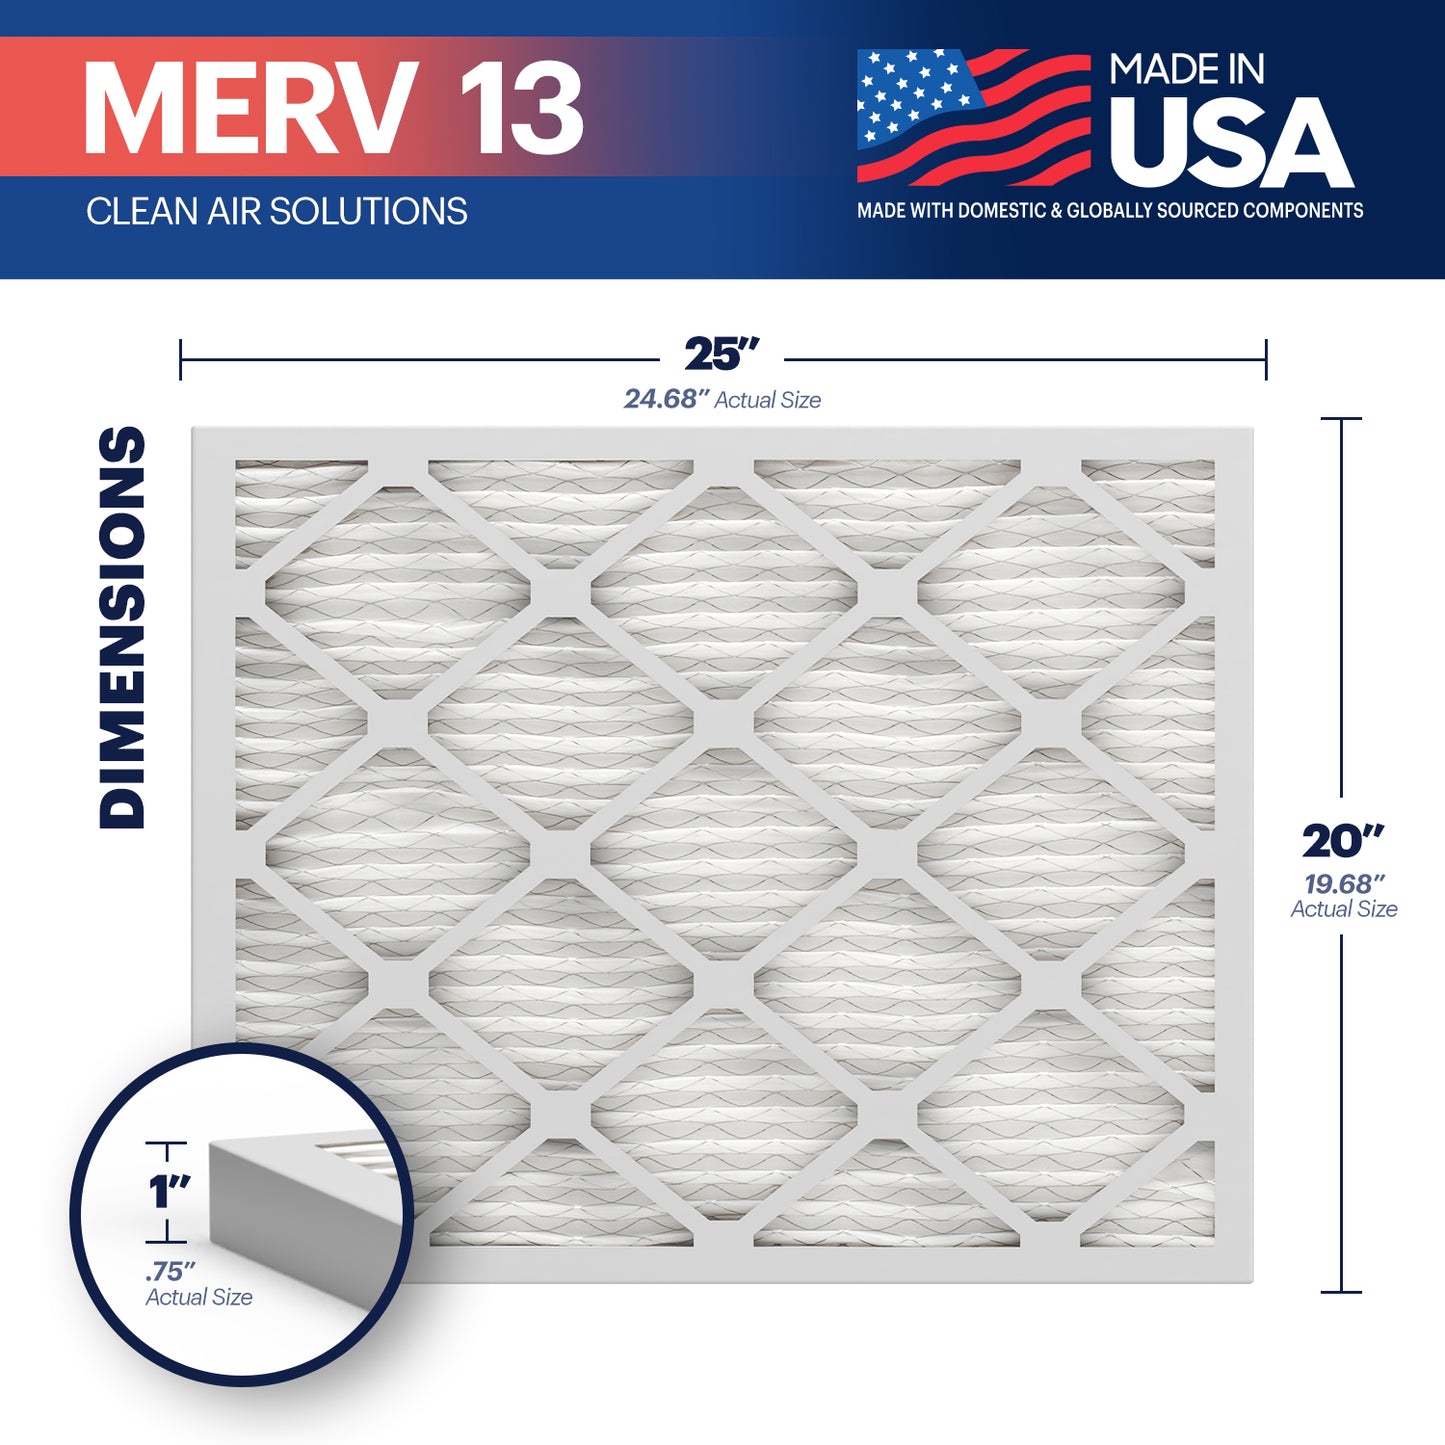 BNX TruFilter 20x25x1 MERV 13 Pleated Air Filter – Made in USA (4-Pack)